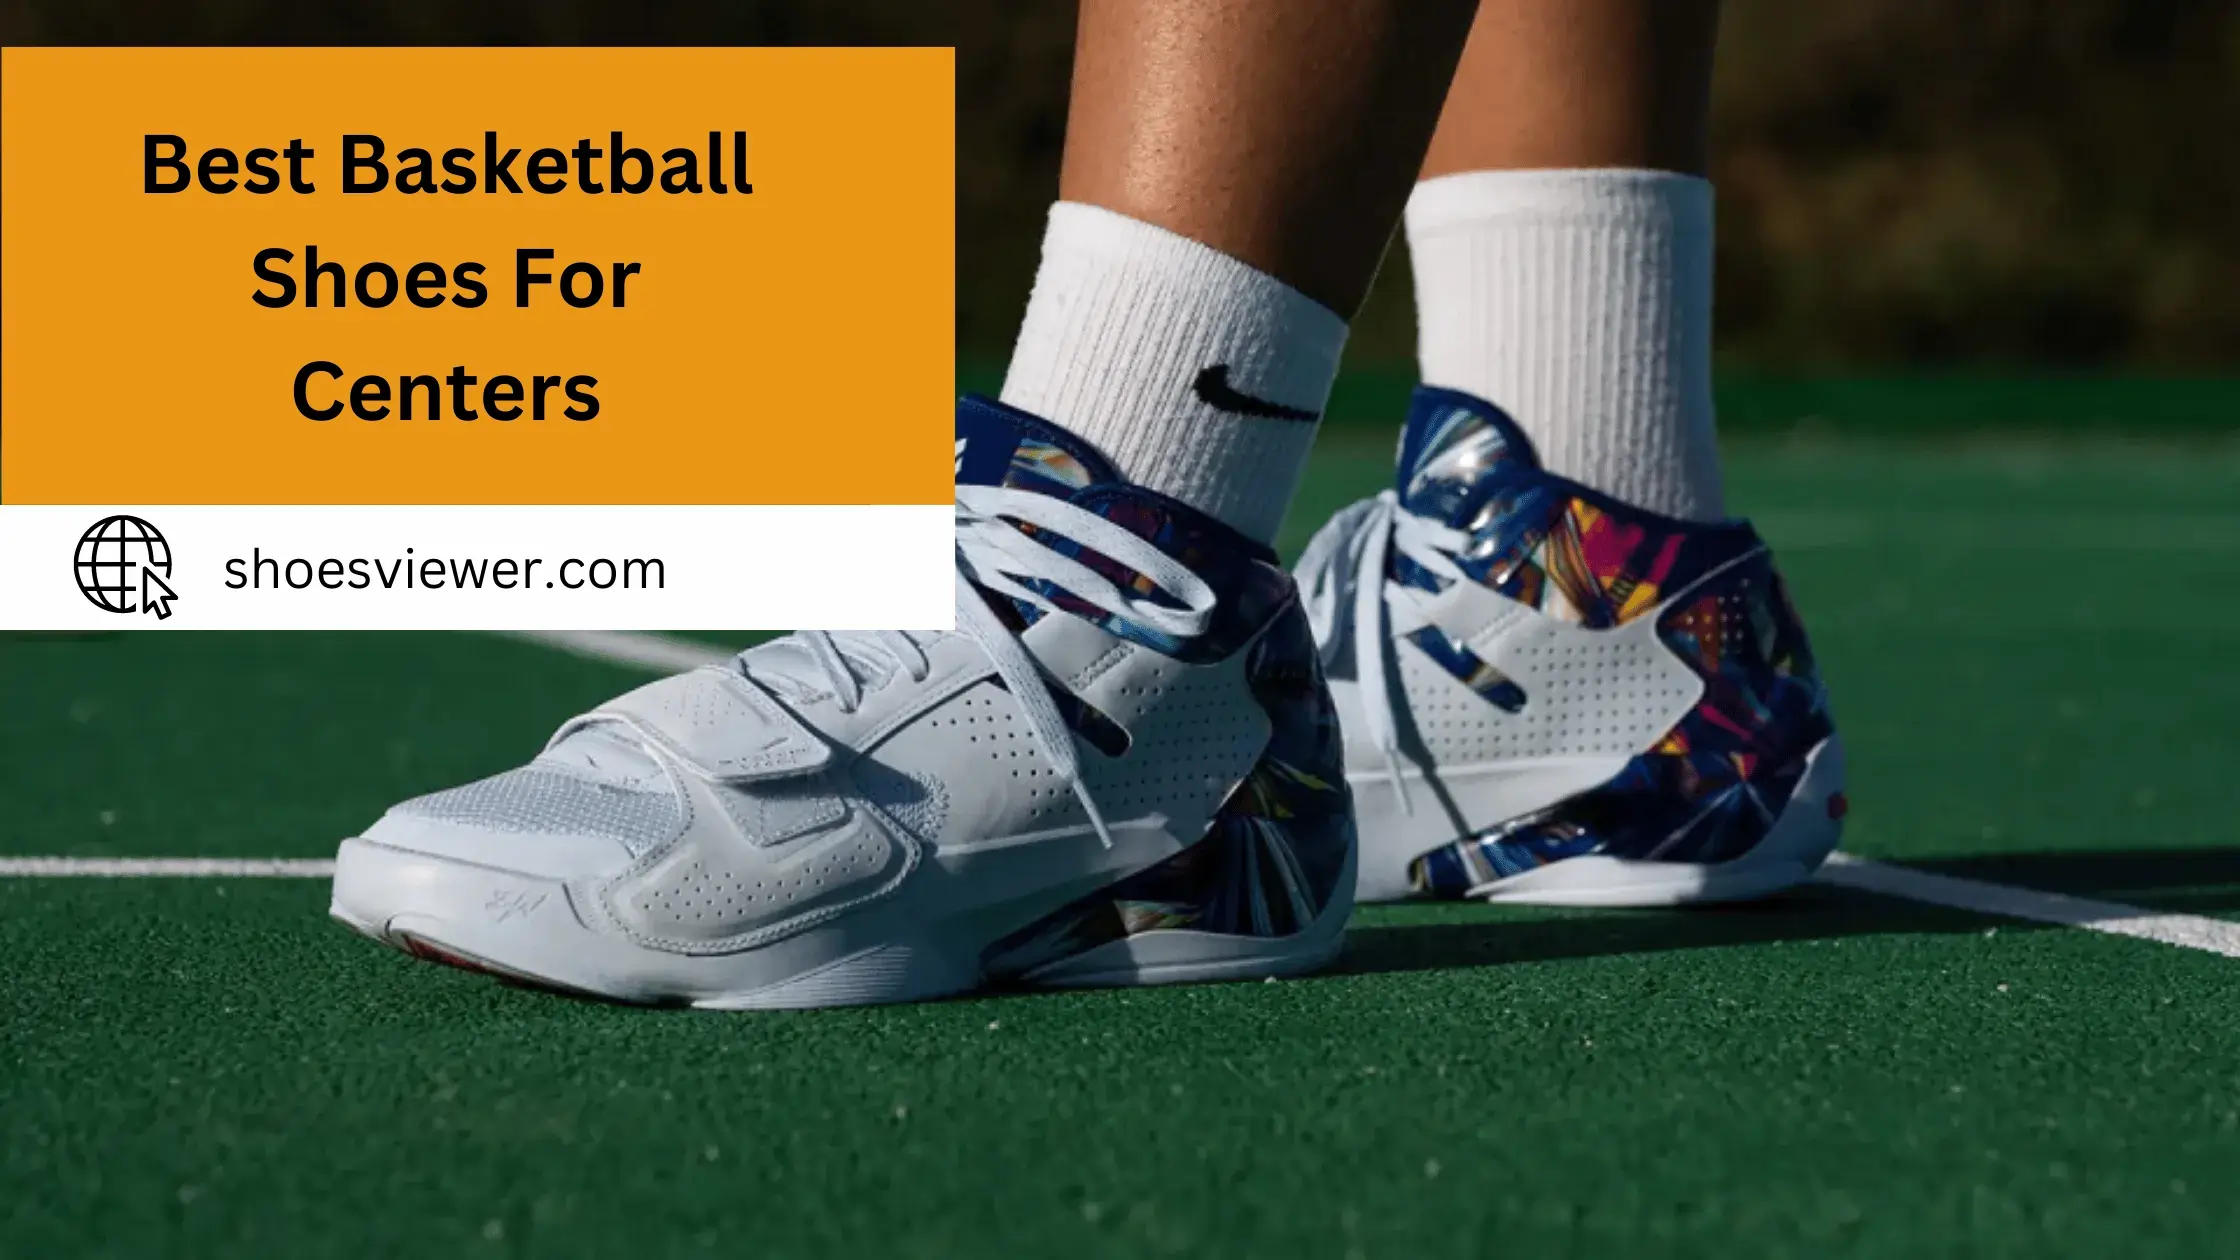 Best Basketball Shoes For Centers - (An In-Depth Guide)